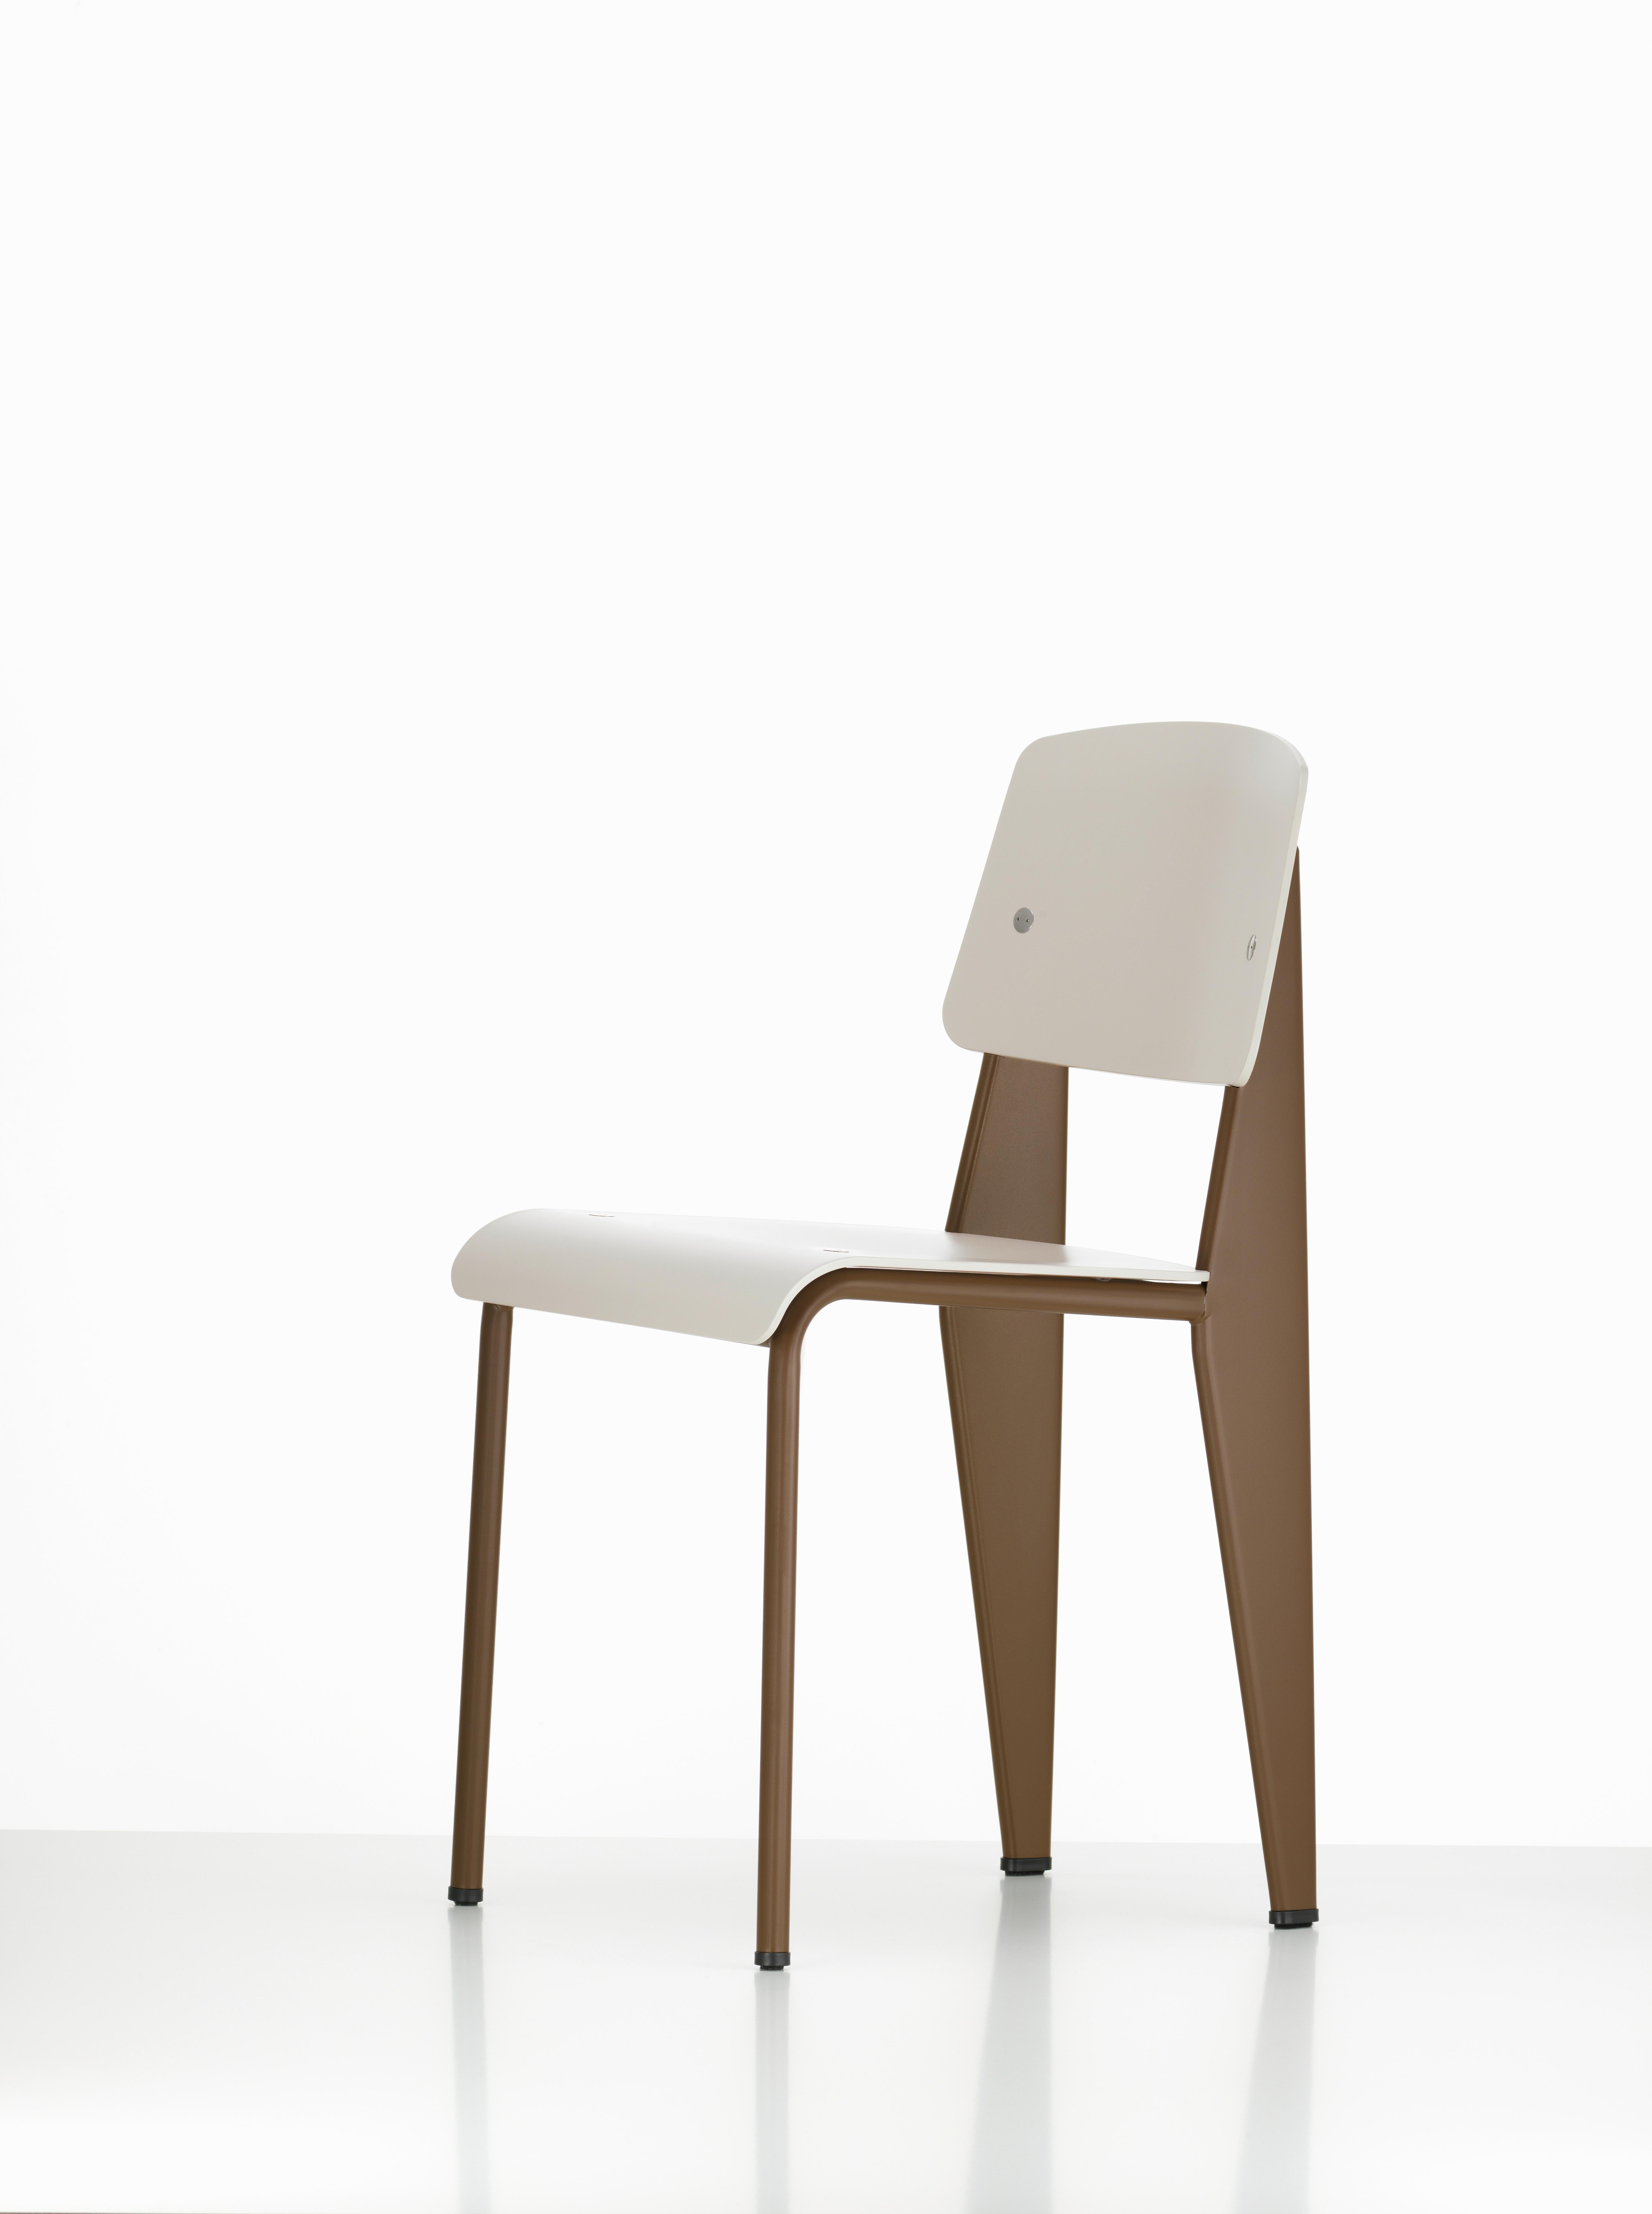 Powder-Coated Jean Prouvé Standard Chair SP in Teak Brown and Mint for Vitra